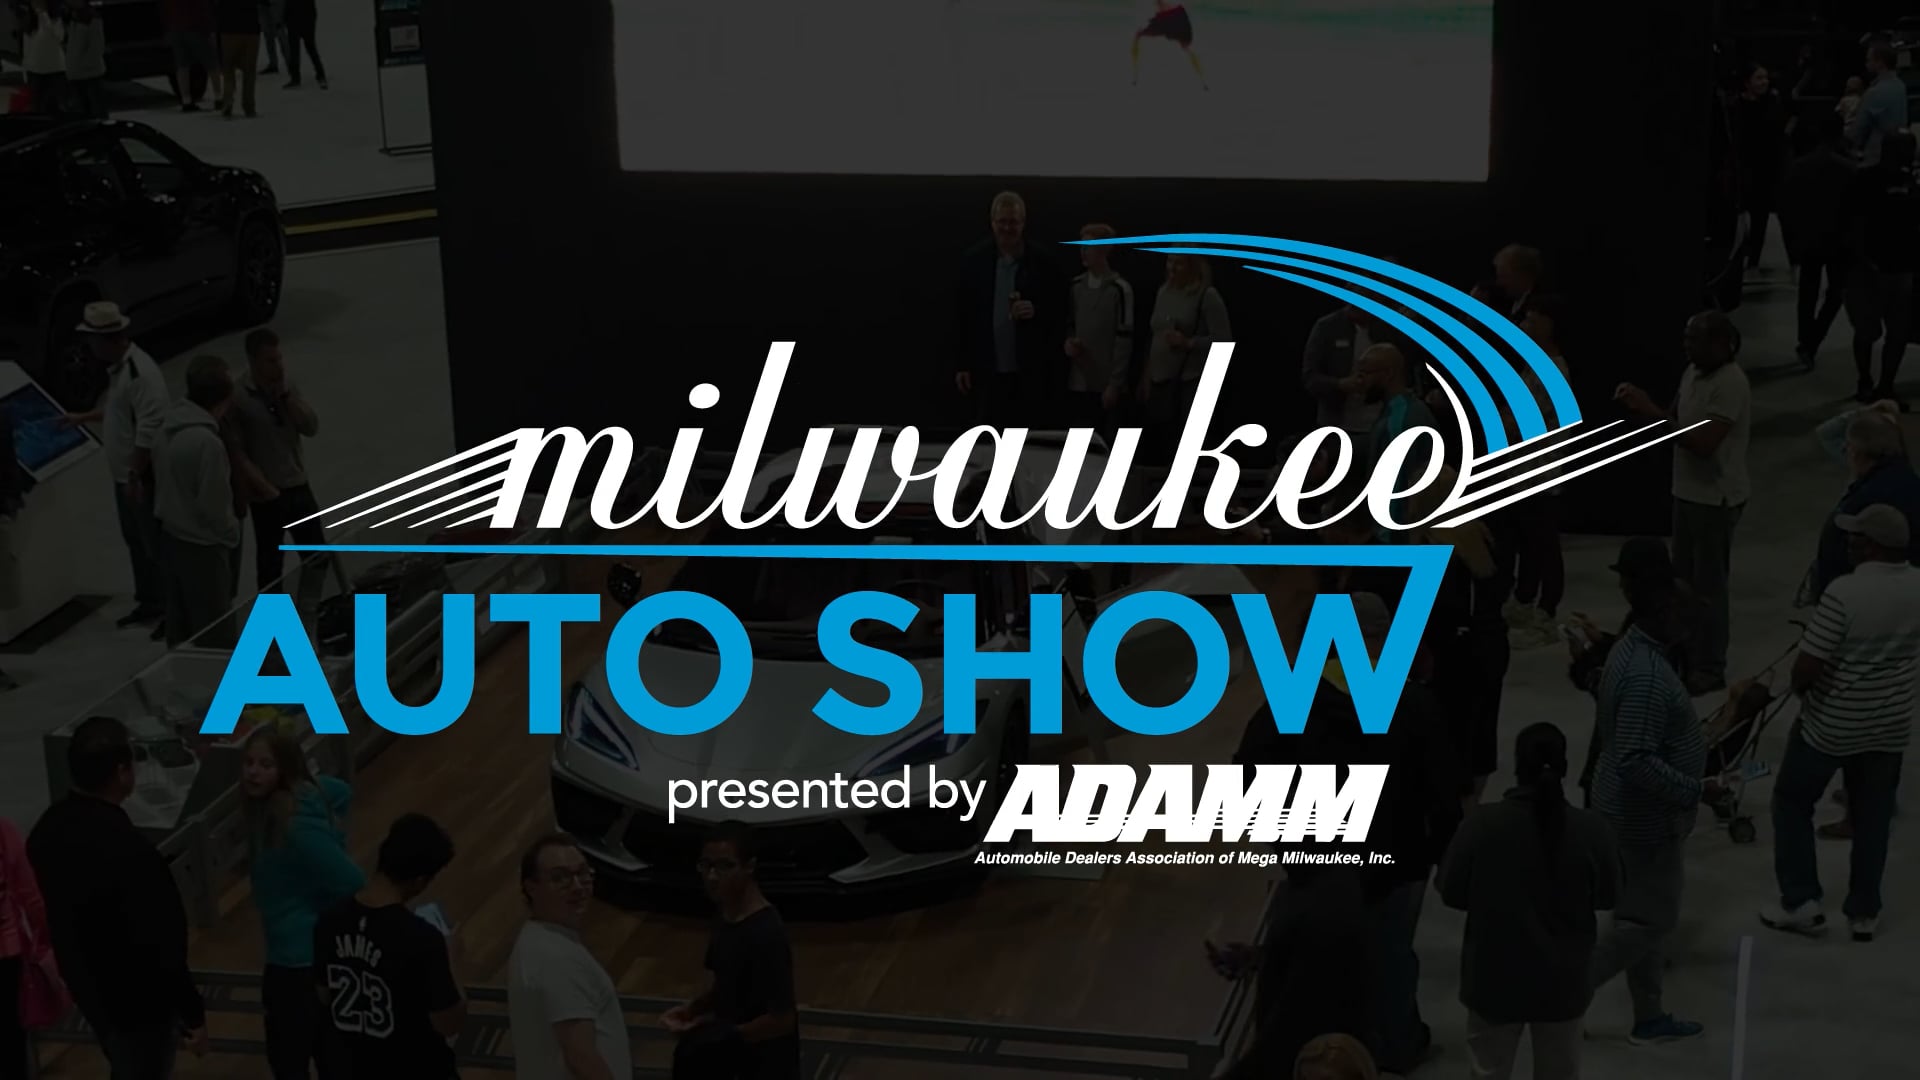 MKE Auto Show 2023 Ticket Giveaway on Vimeo